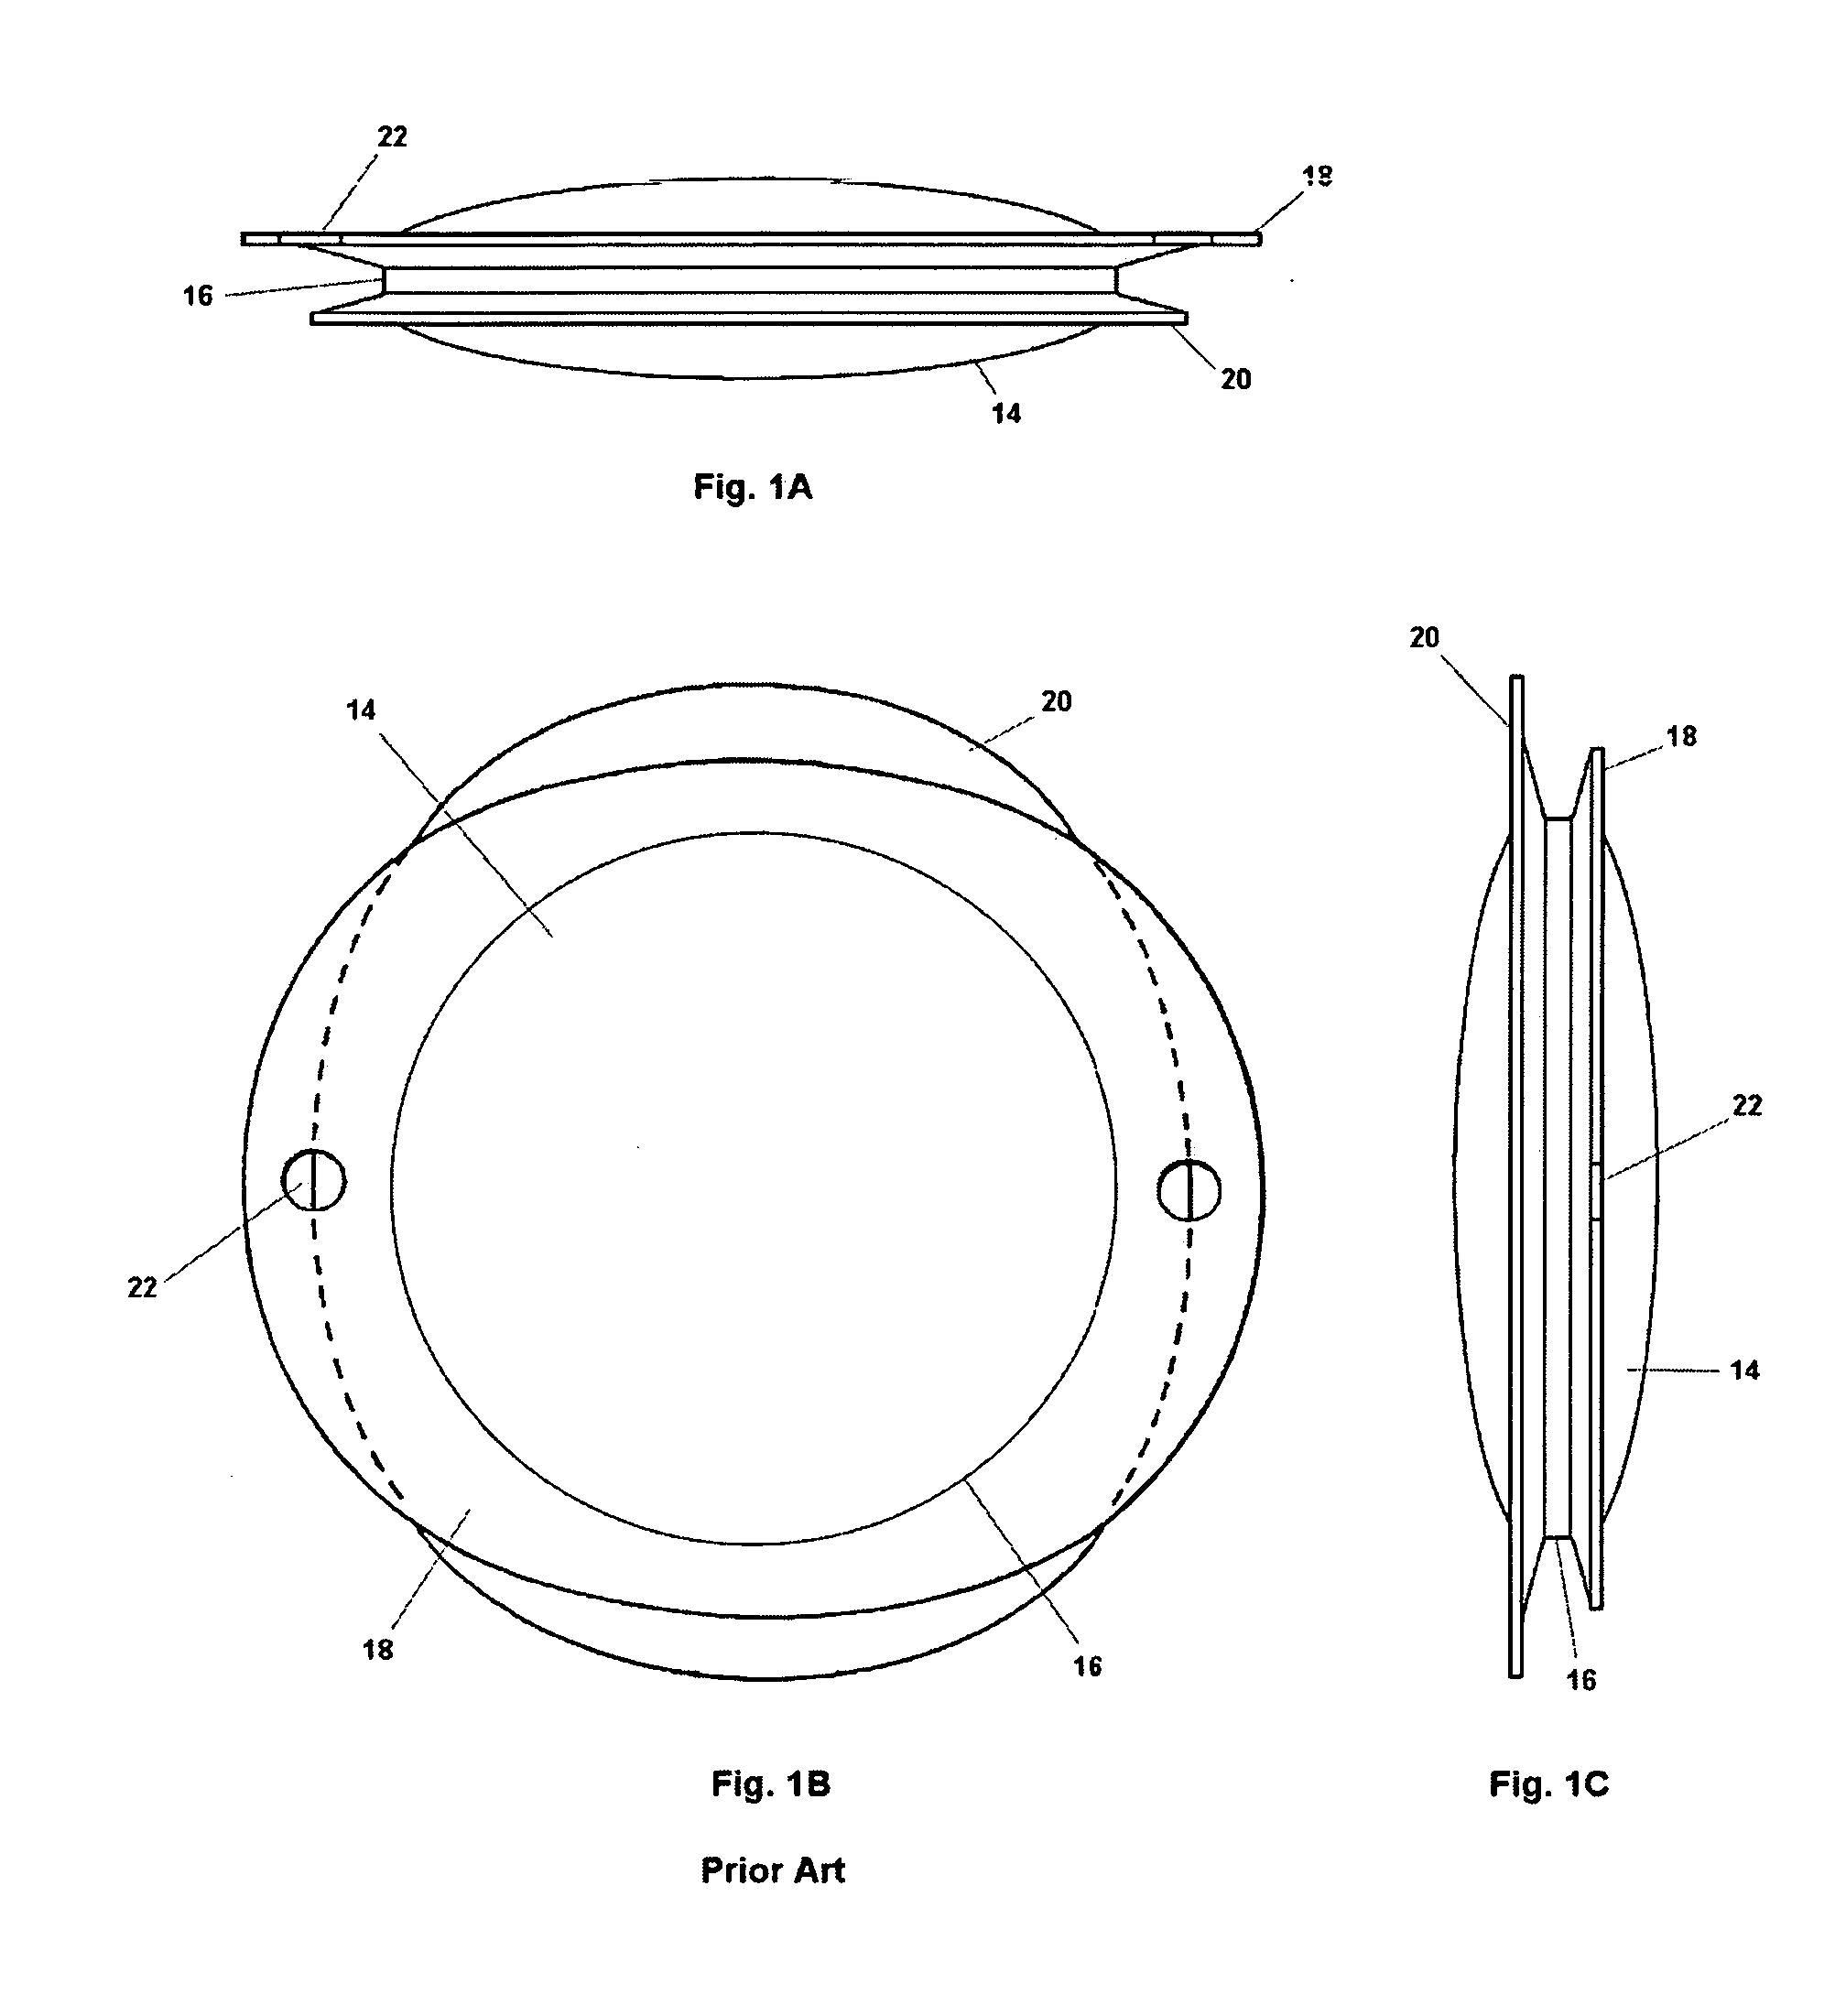 Bag-in-the-lens intraocular lens with removable optic and capsular accommodation ring